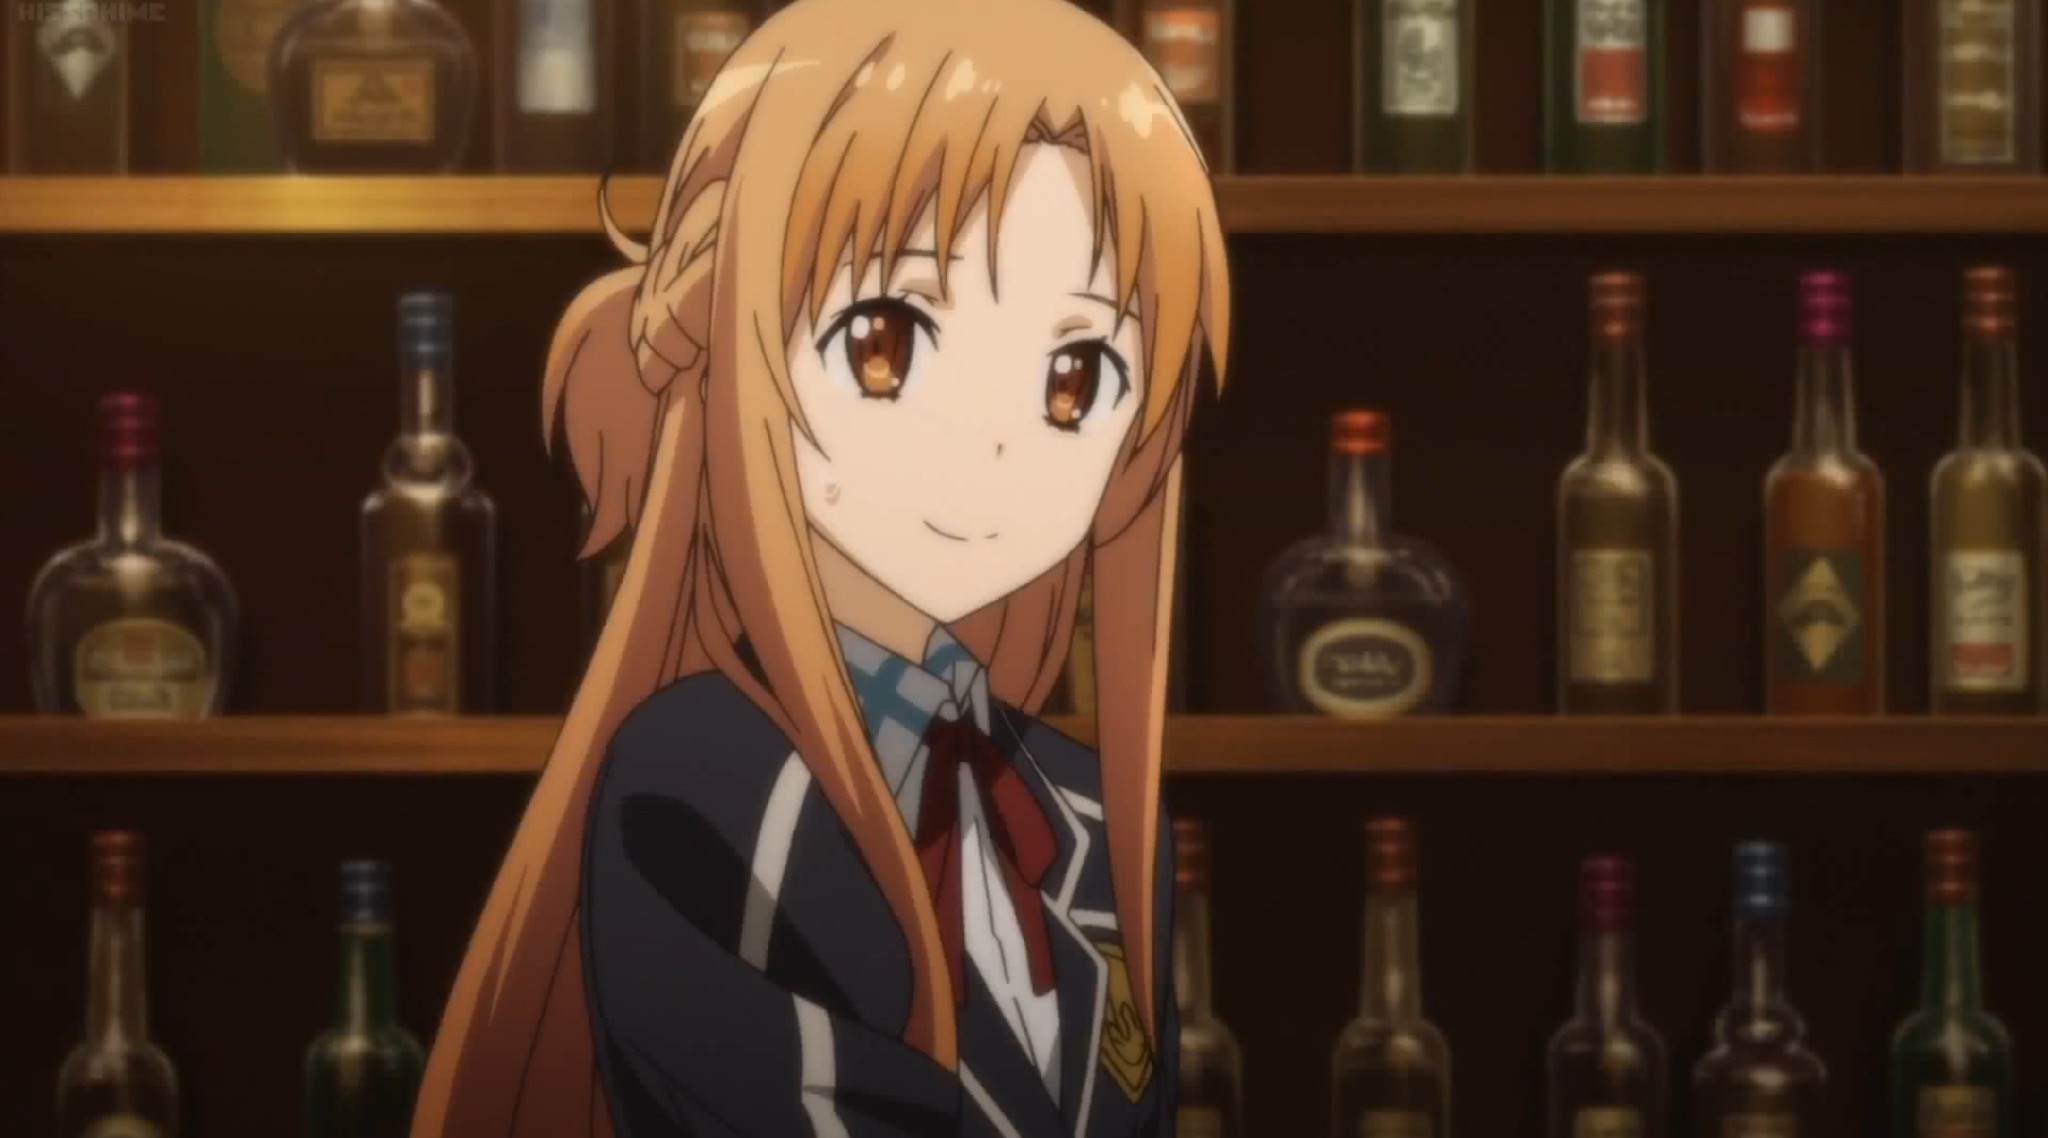 I want to snuggle with Yuuki and be her friend. : r/swordartonline